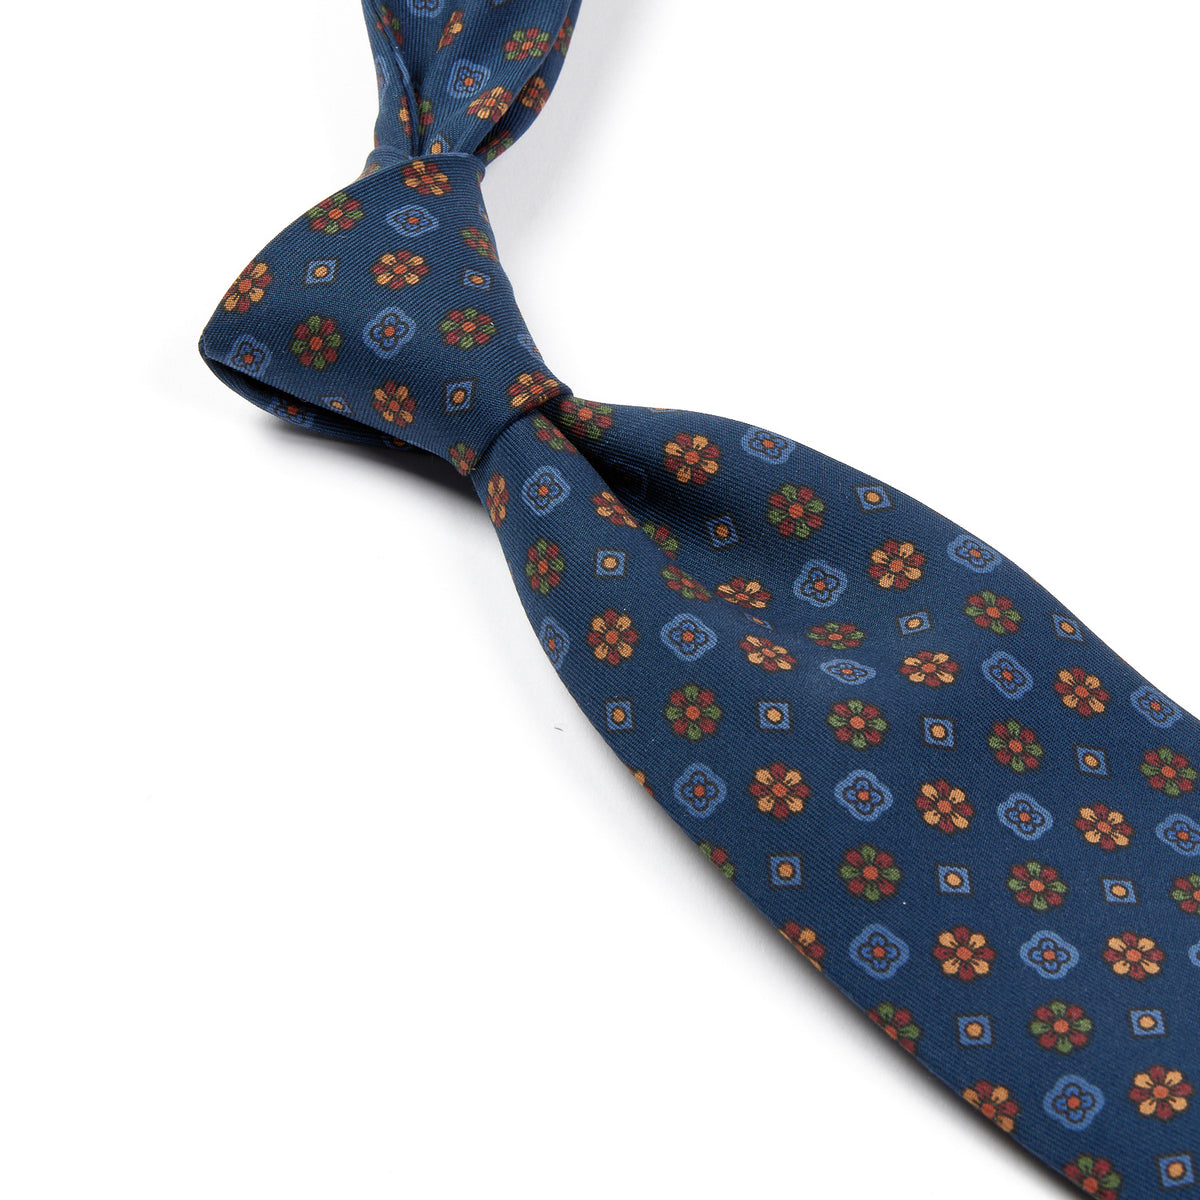 A high-quality, handmade Sovereign Grade Blue Mixed Floret Ancient Madder Tie with a brown and orange pattern from KirbyAllison.com.